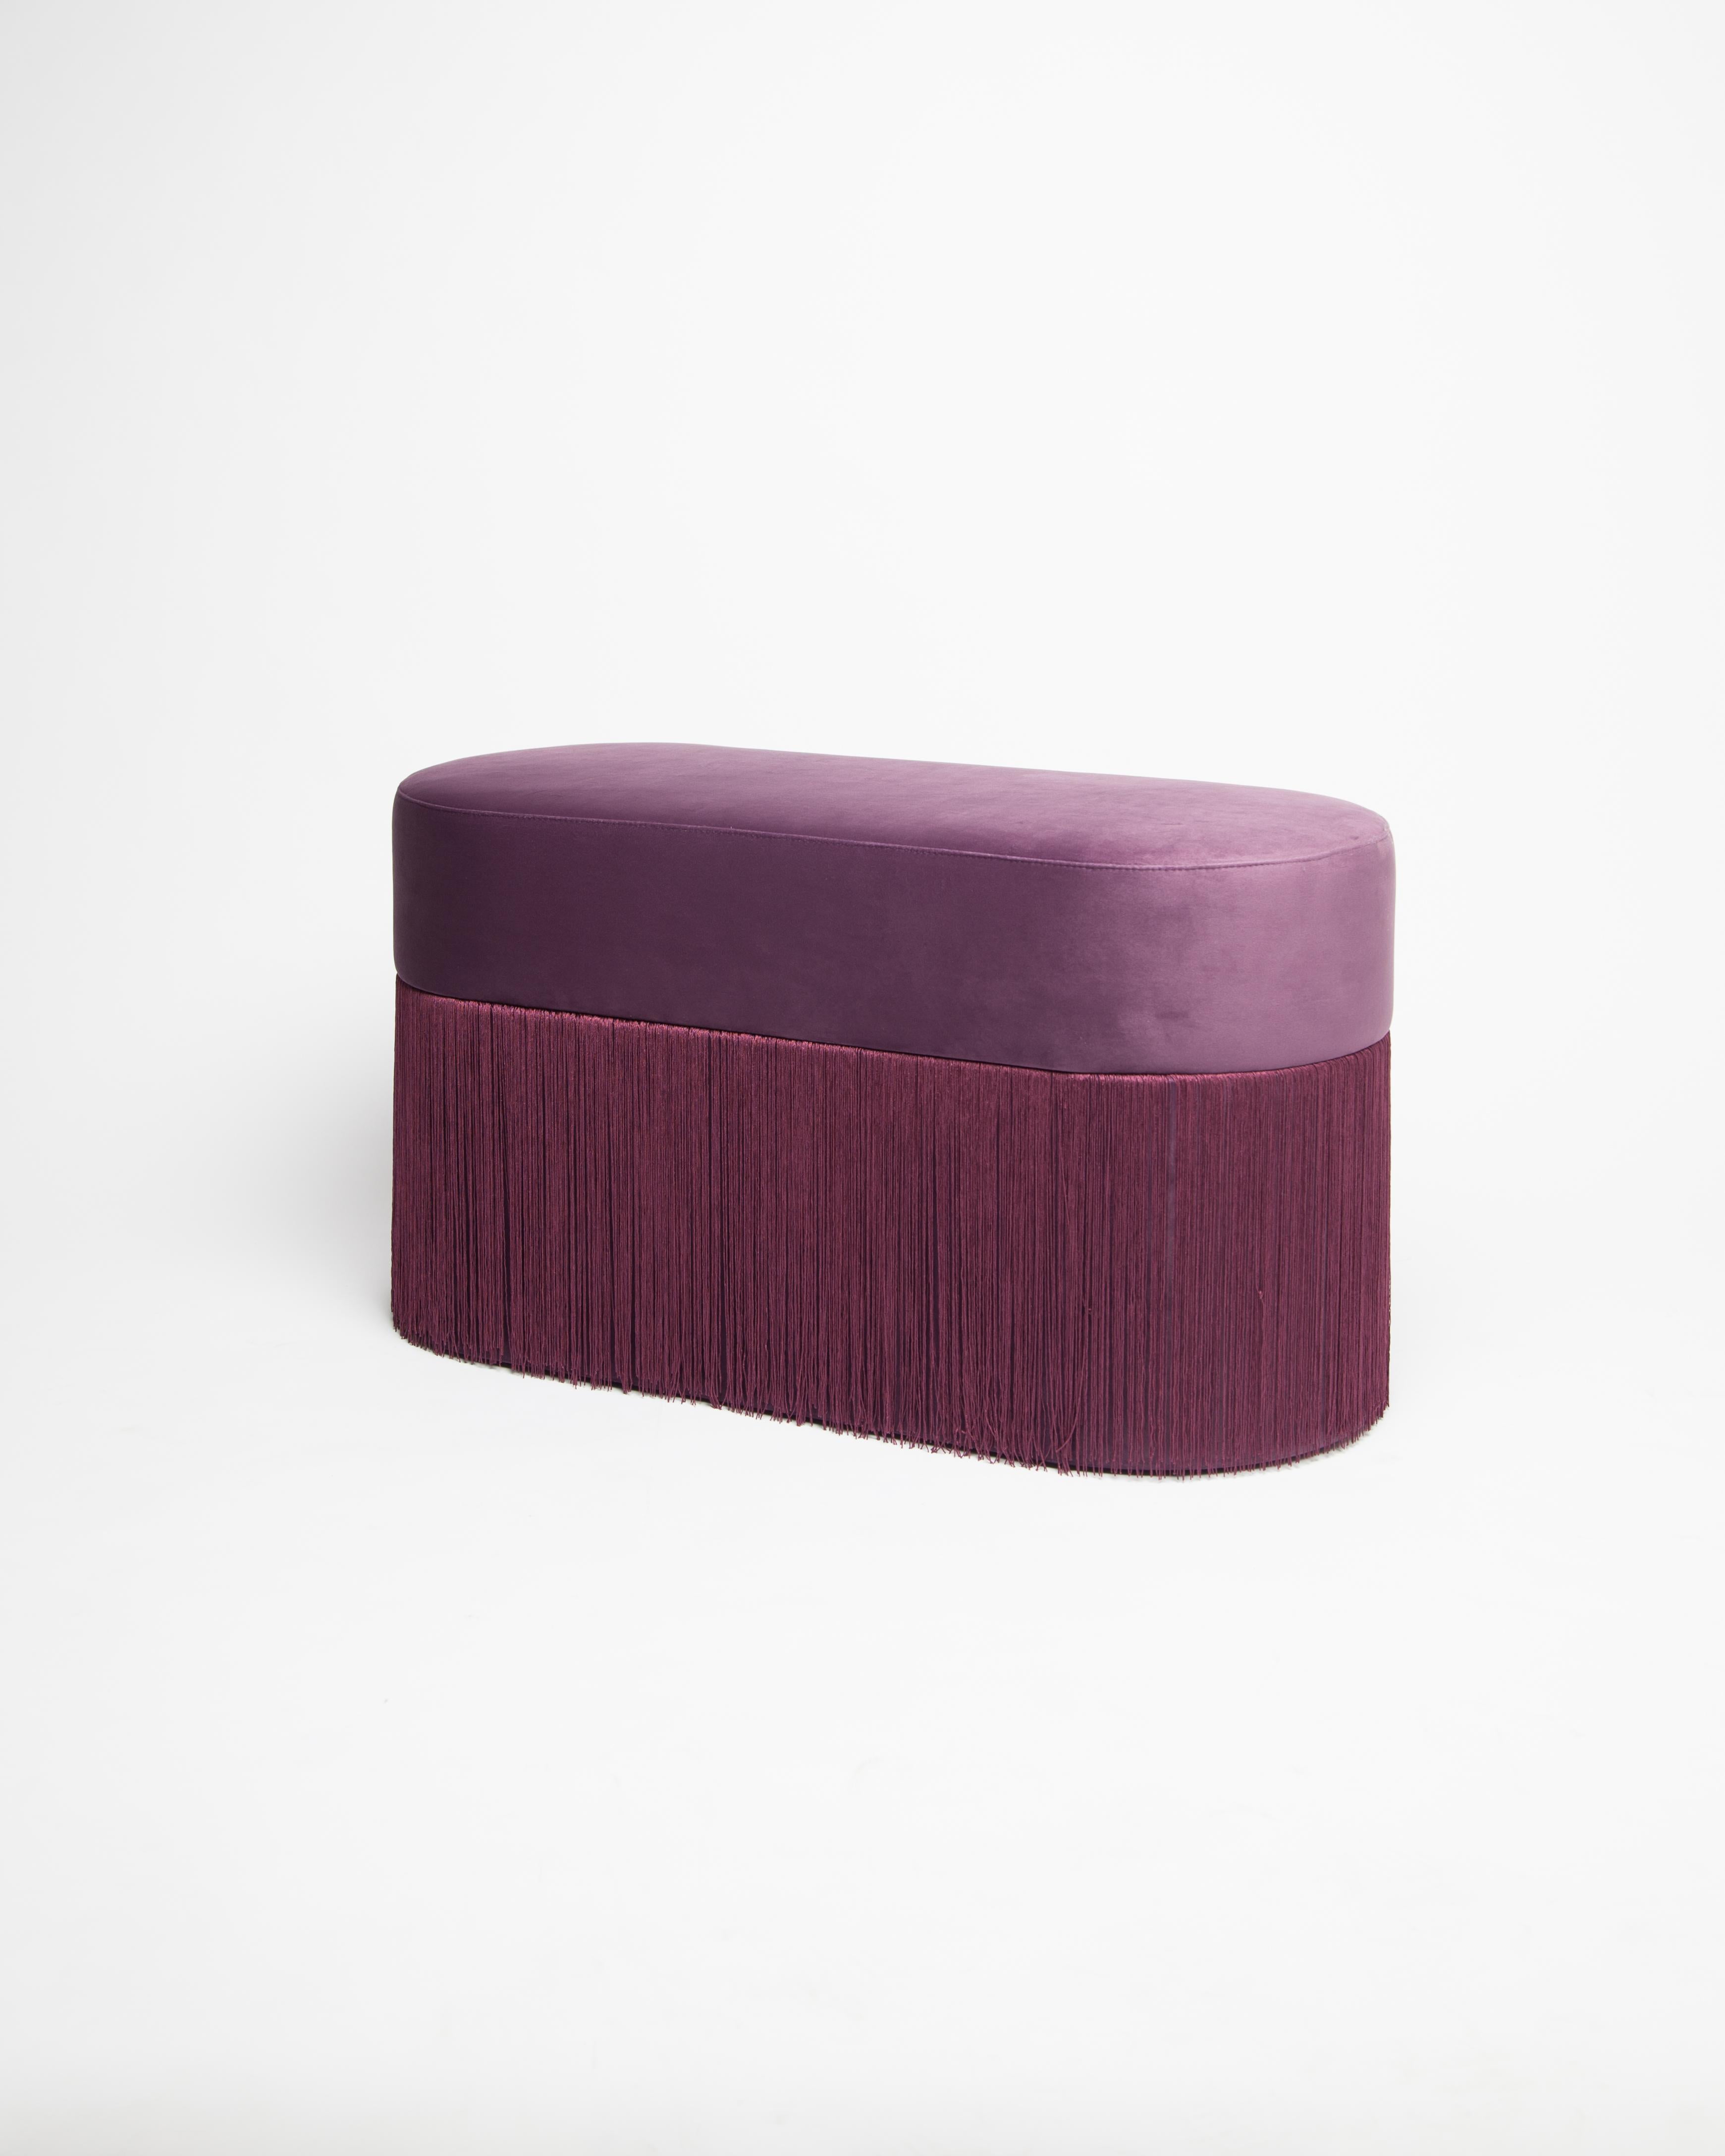 Spanish Pair of Pouf Pill Small and Large Purple in Velvet Upholstery and Fringes For Sale